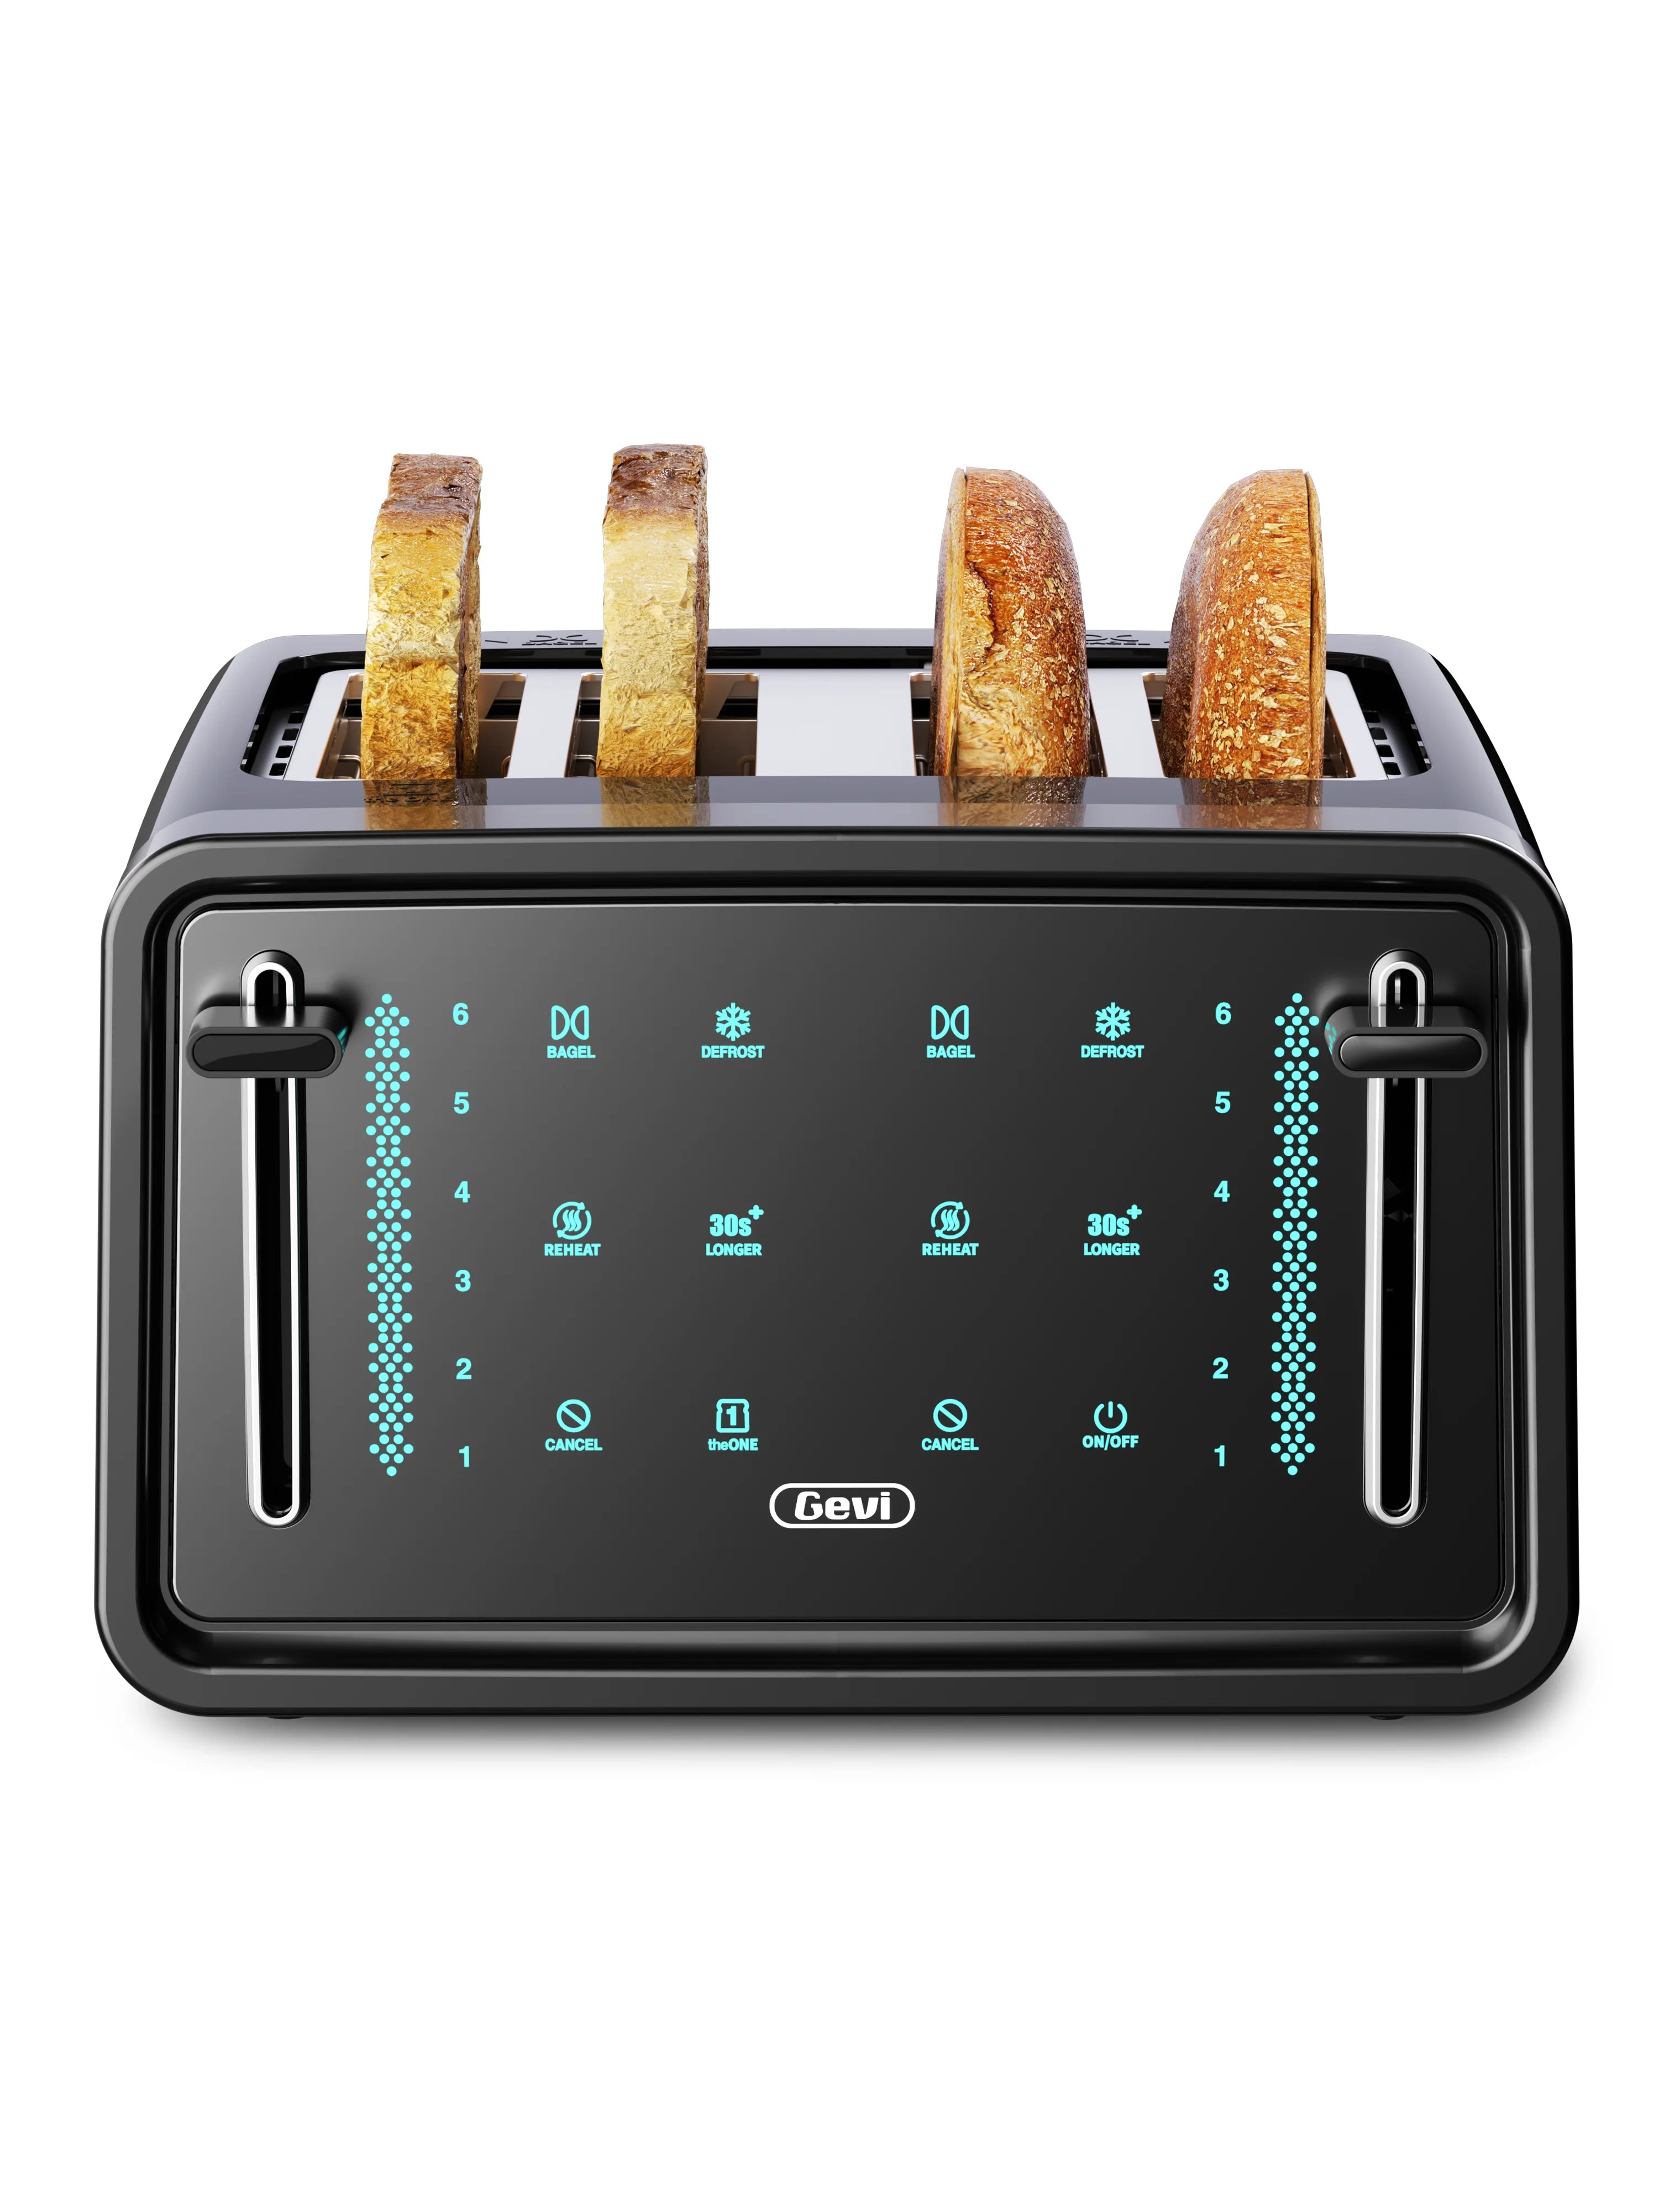 Bread Toaste with Removable Crumb Tray Toasters Cooking Appliances Home 6  Operating Modes 2 Slices Mini Auto Breakfast Toaster